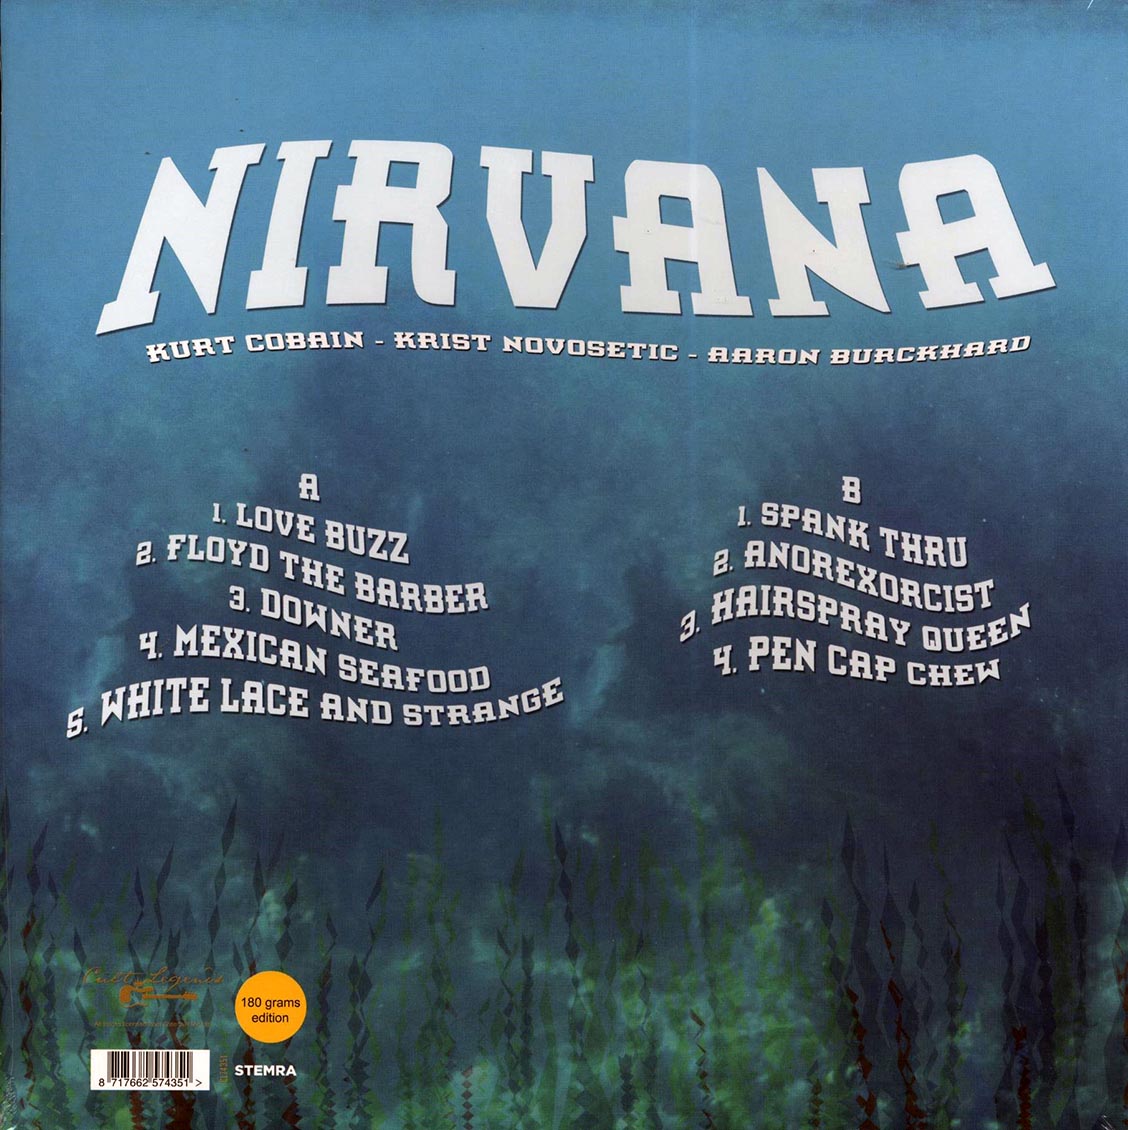 Nirvana - Live On The Air 1987: The Evergreen State College, Olympia, WA - Vinyl LP, LP